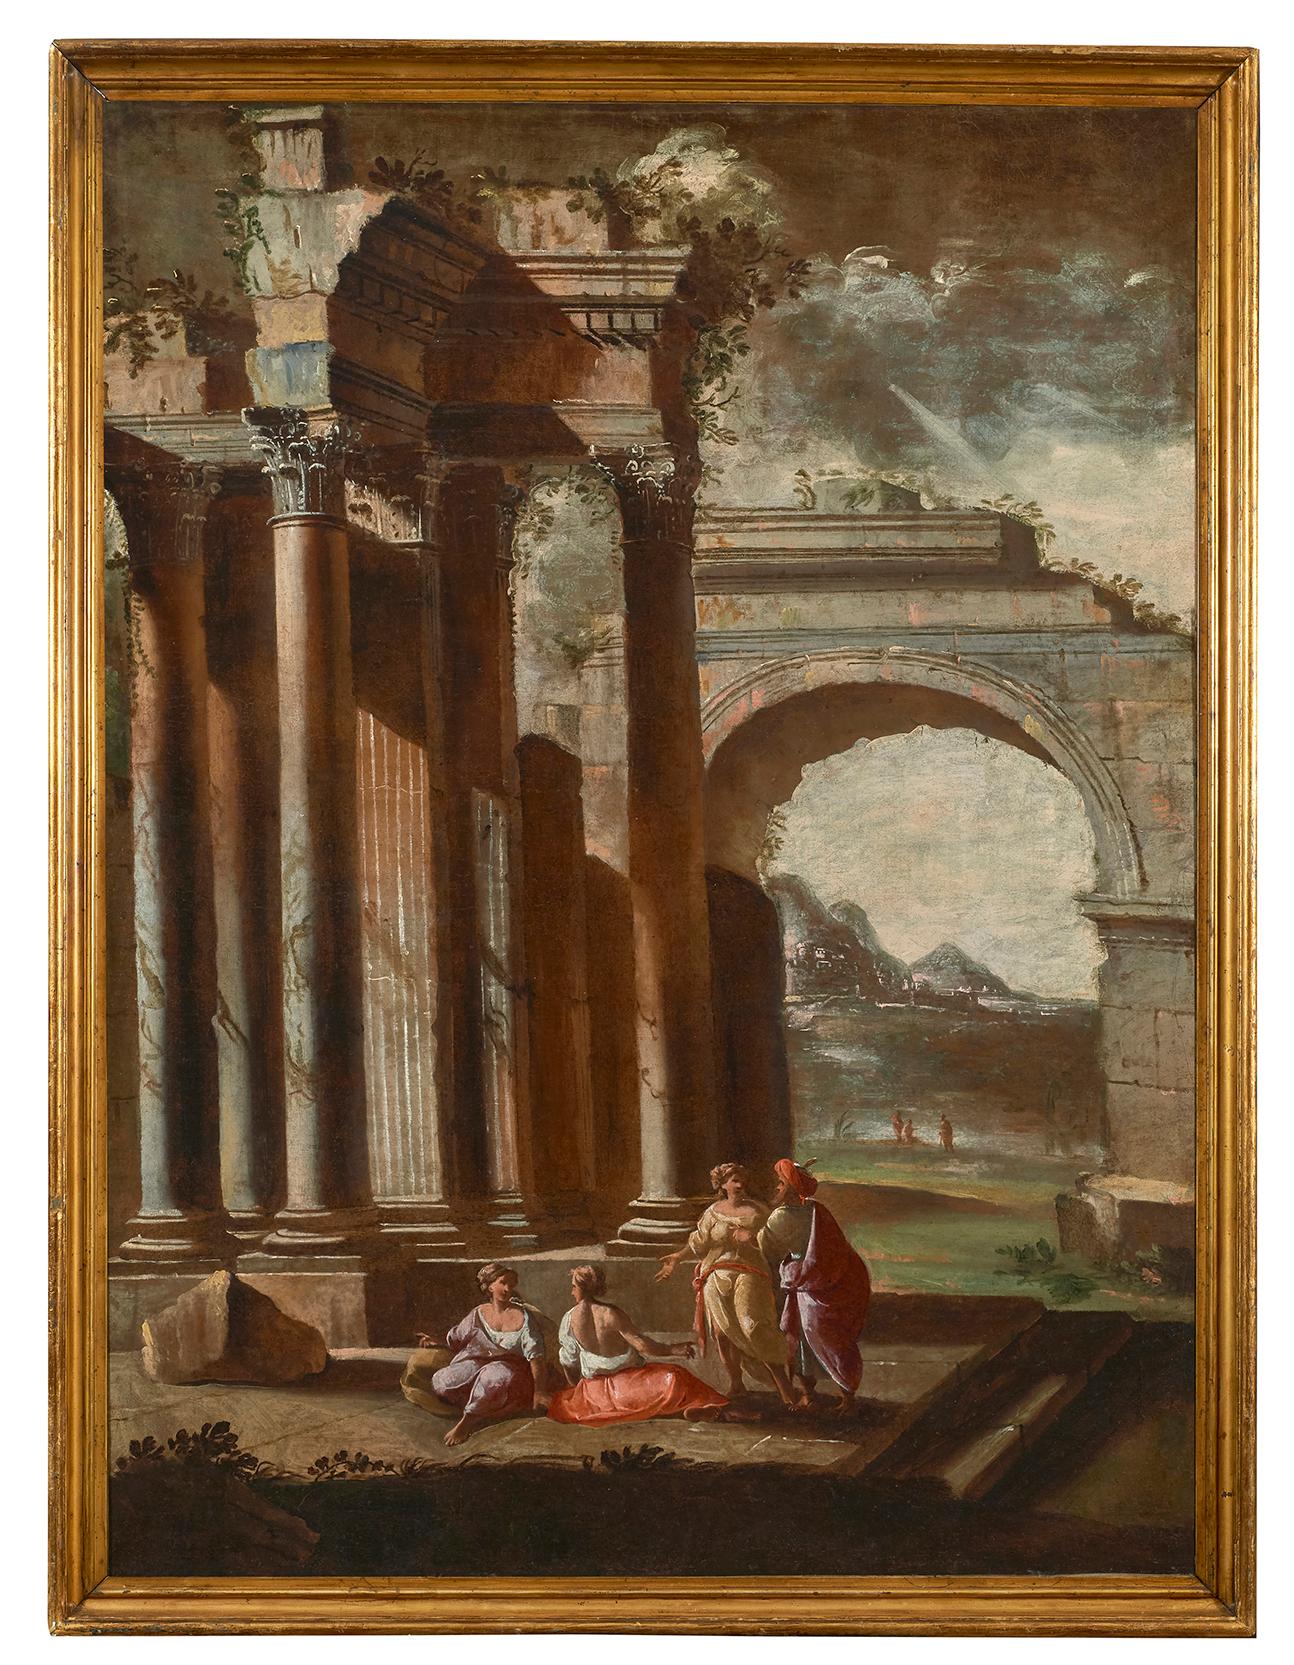 Painting oil on canvas depicting an architectural capriccio measuring 133 x 99 cm without frame and 141 x 107 with frame of the painter Alberto Carlieri (Rome 1672-1719) .

This impressive architectural capriccio consists of the remains of an